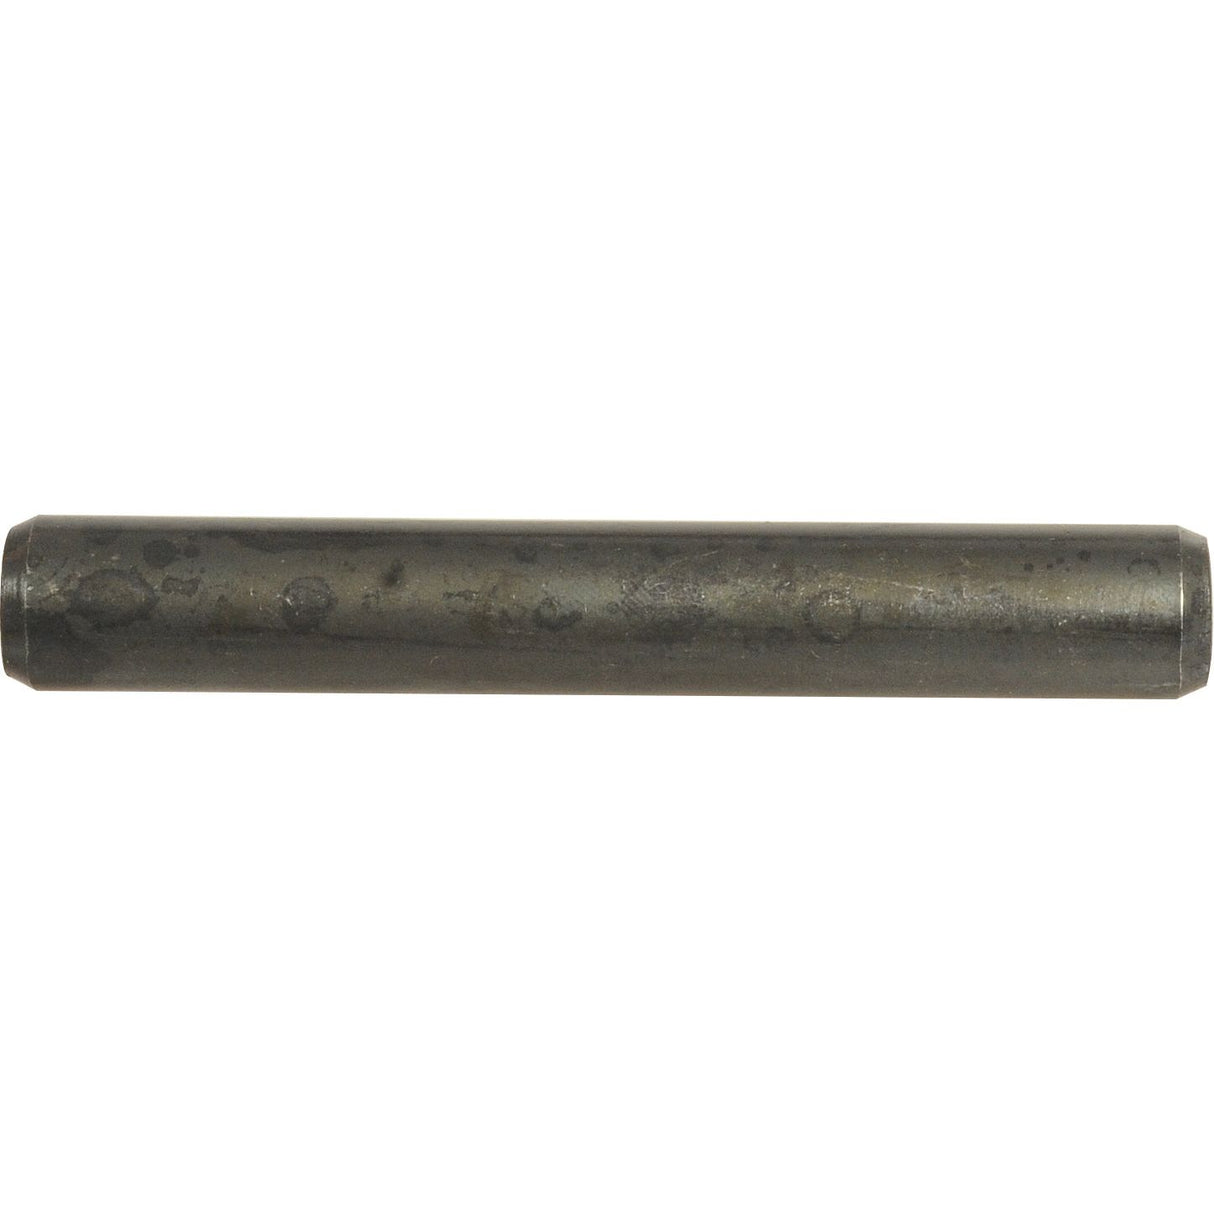 Imperial Roll Pin, Pin⌀3/16'' x 2''
 - S.1121 - Farming Parts